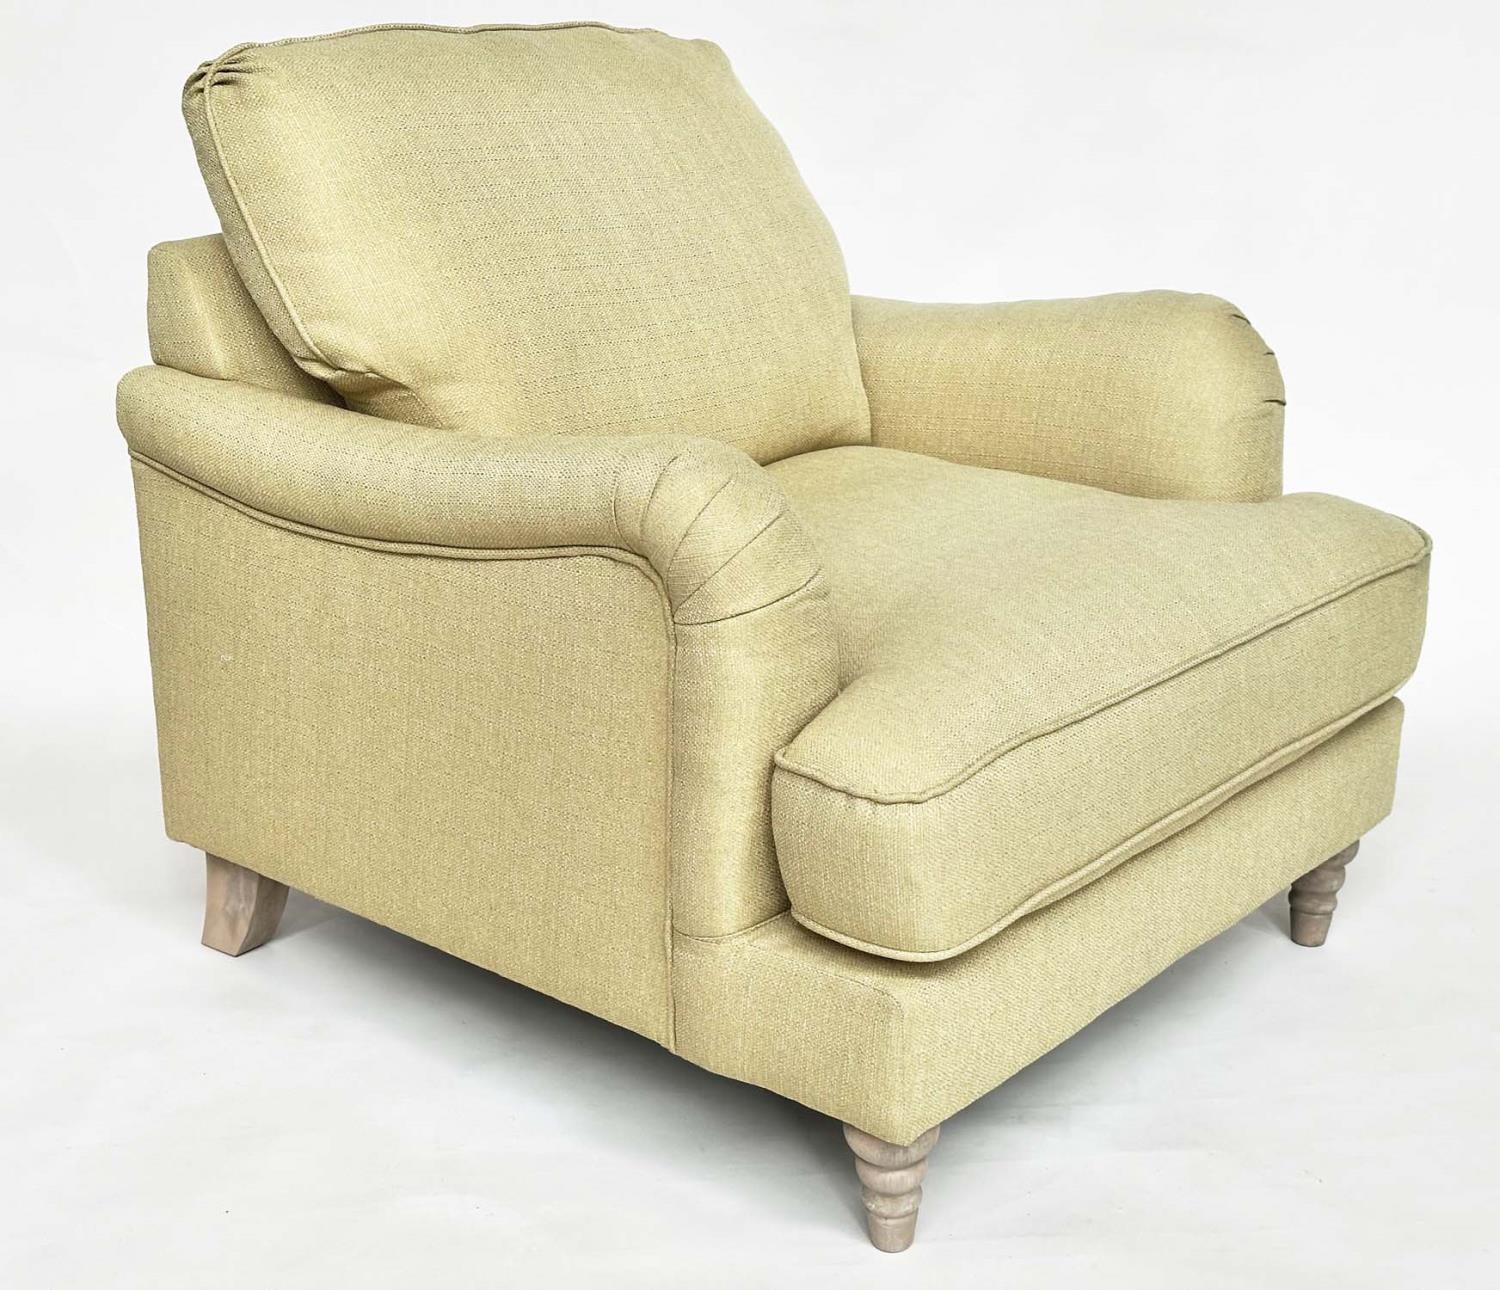 COUNTRY HOUSE ARMCHAIR, Howard and Son style Bridgewater model inspired with primrose yellow slub - Image 2 of 8